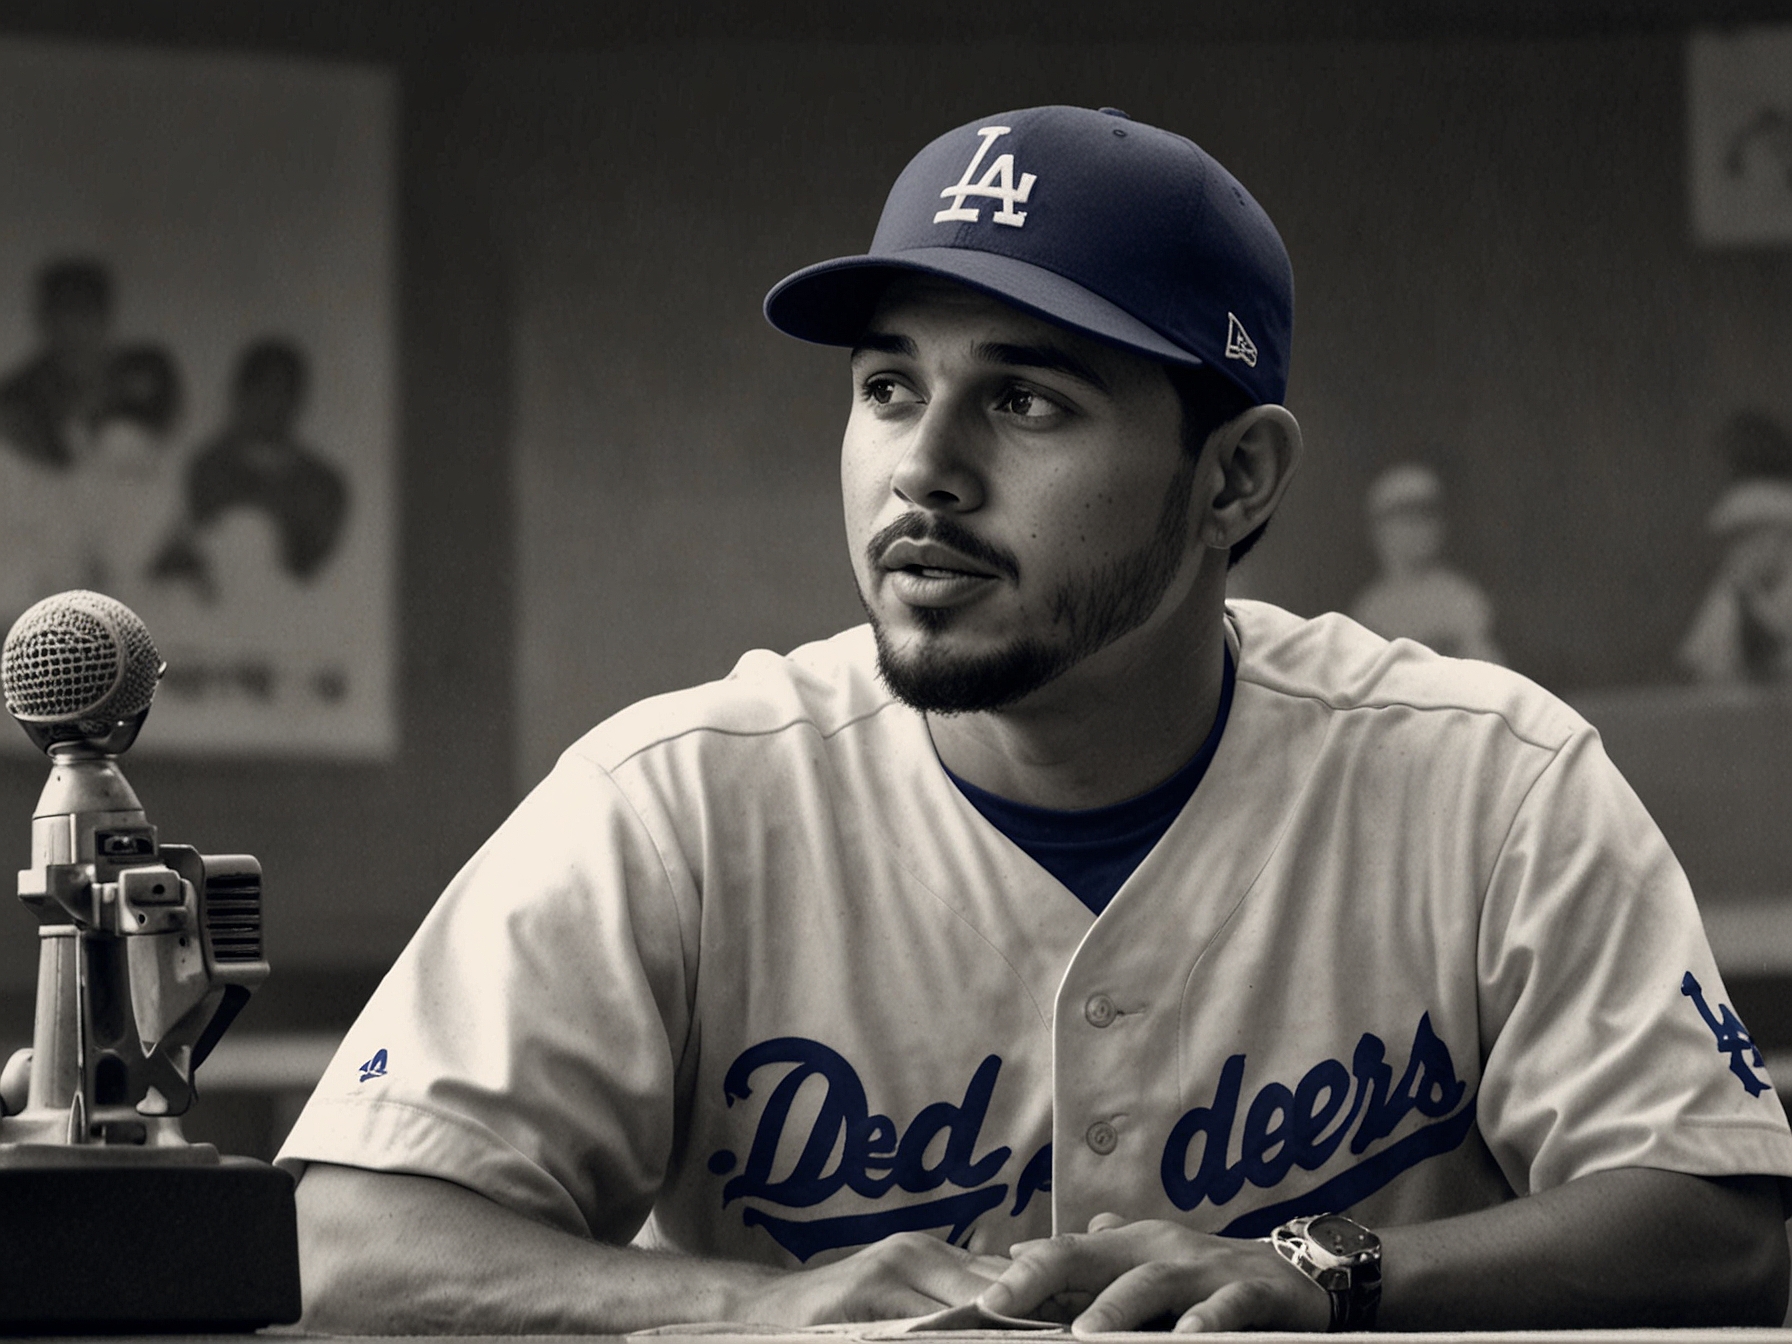 Image of Dodgers General Manager Brandon Gomes addressing the media, emphasizing the team's depth and resilience despite injuries to key players Mookie Betts and Yoshinobu Yamamoto.